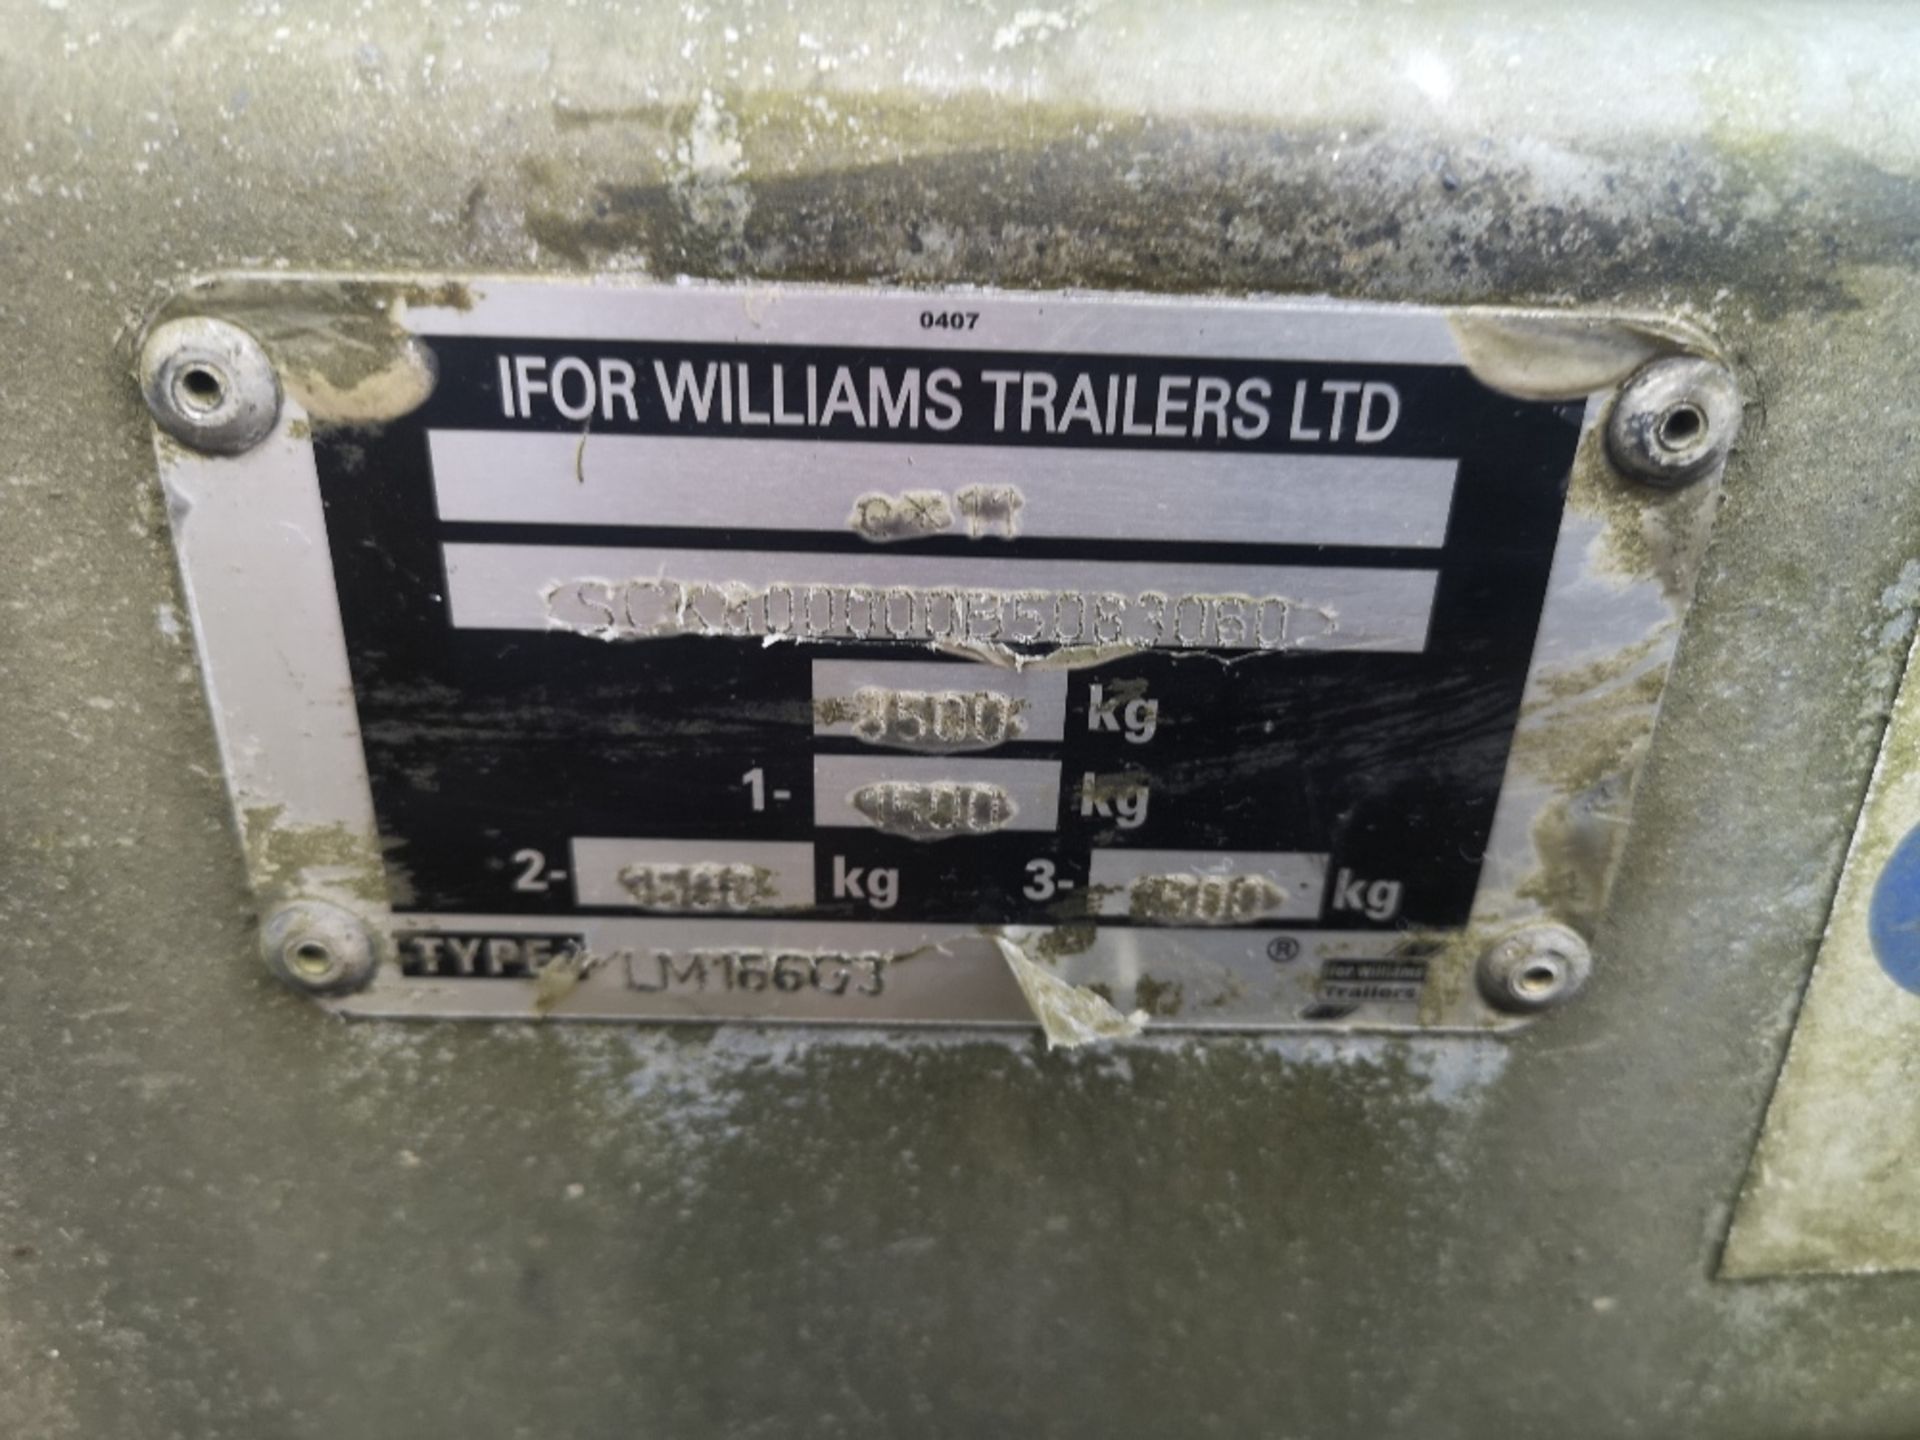 Ifor Williams 3 Axle Dropside Trailer Type: LM166G3 - Image 4 of 4